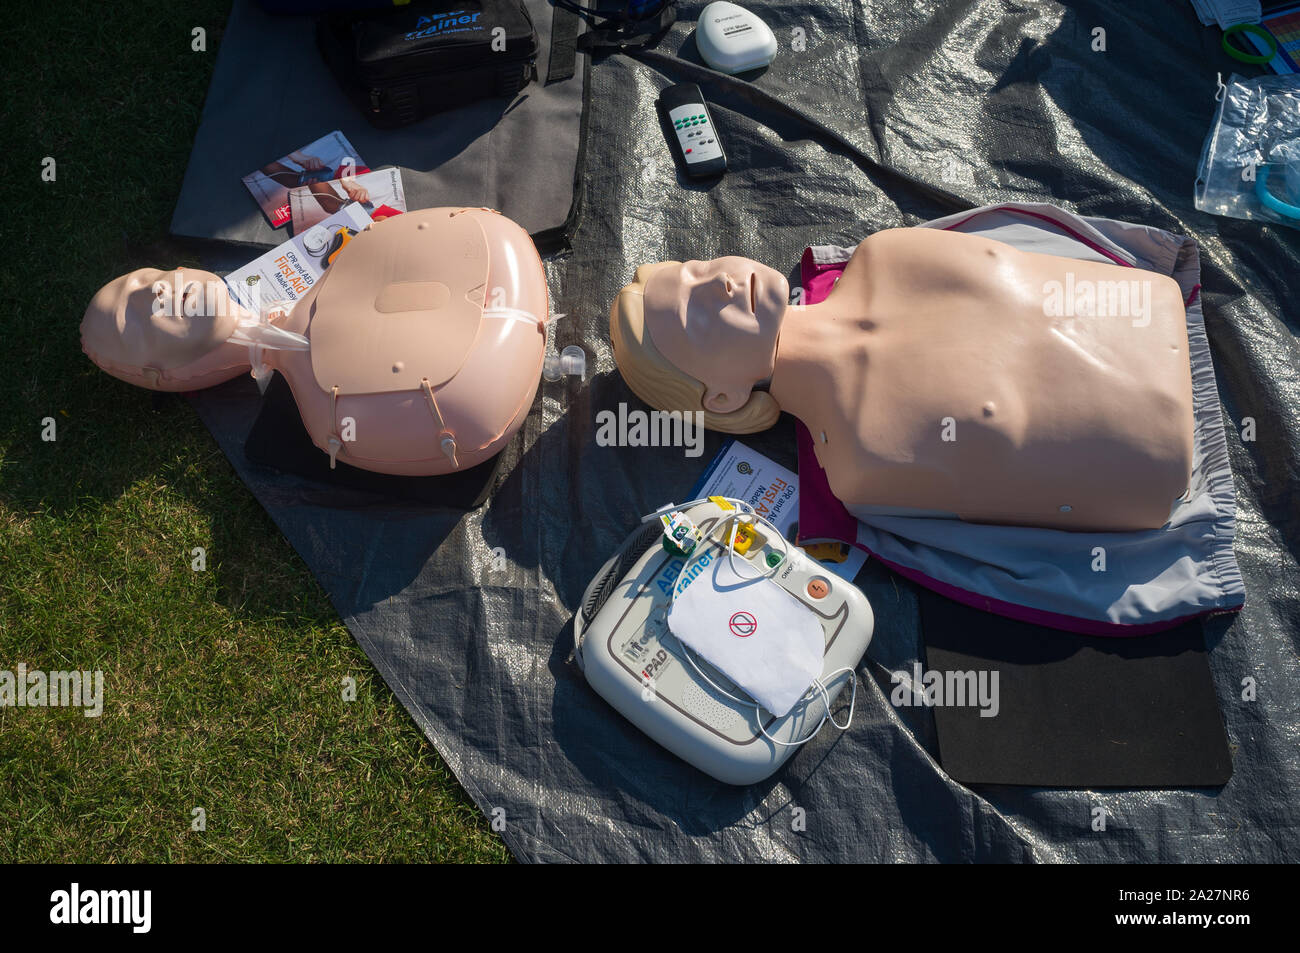 CPR and AED training dummies Stock Photo